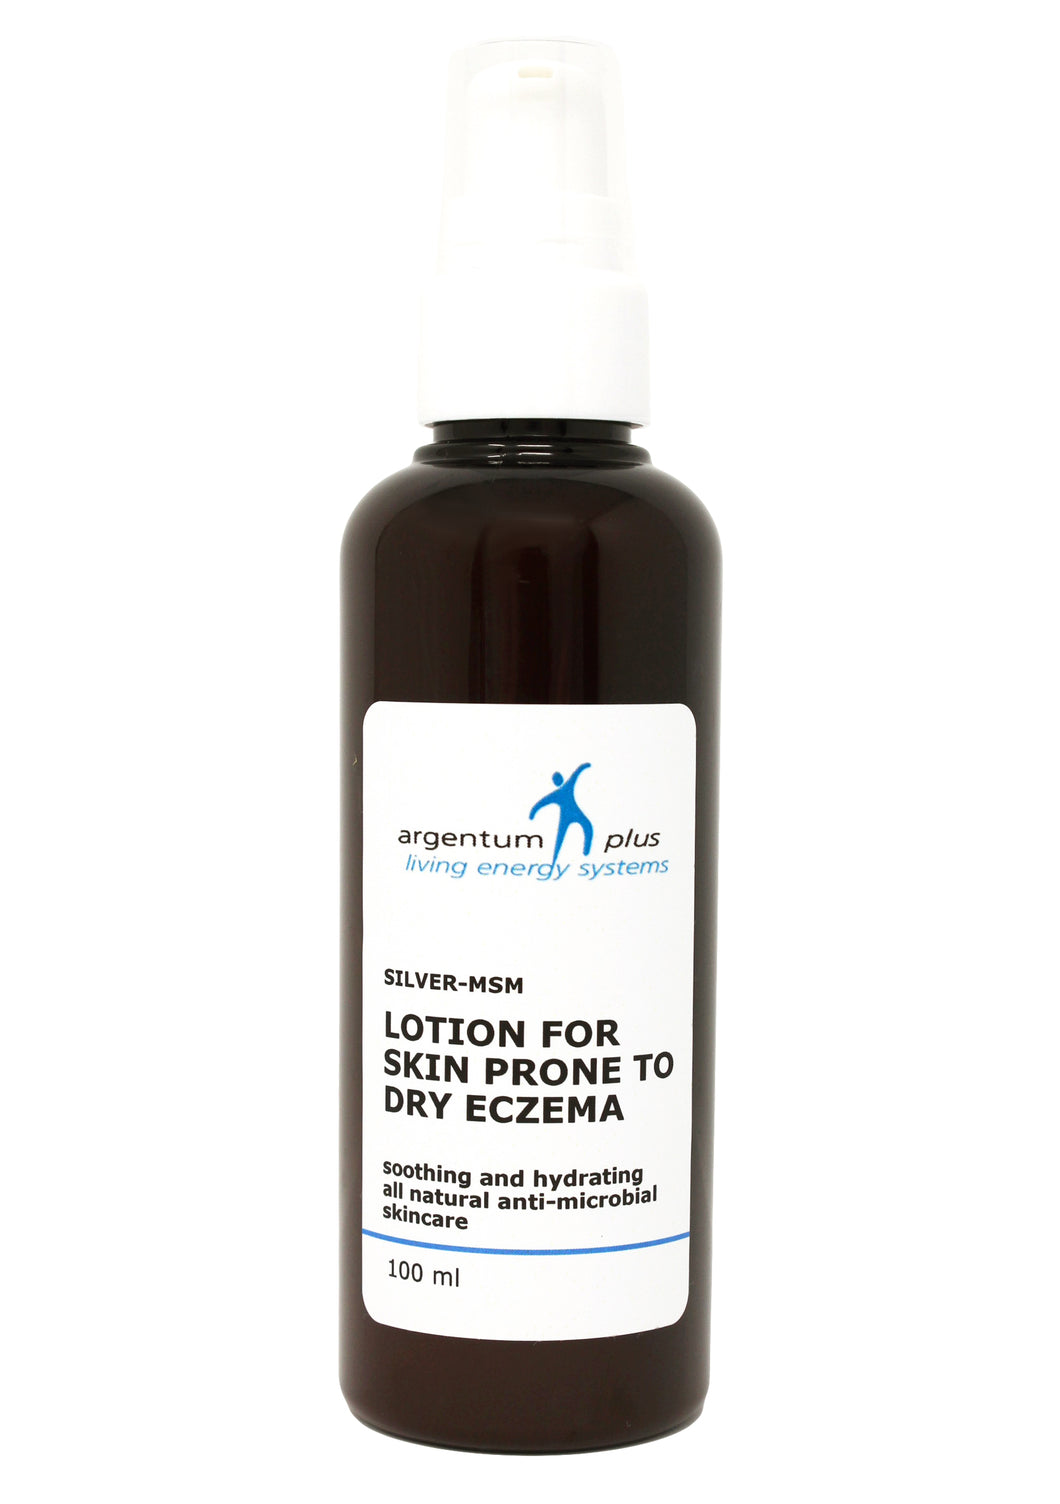 Silver-MSM Lotion for Dry Eczema 3 x 100ml - Special Offer Price!!!